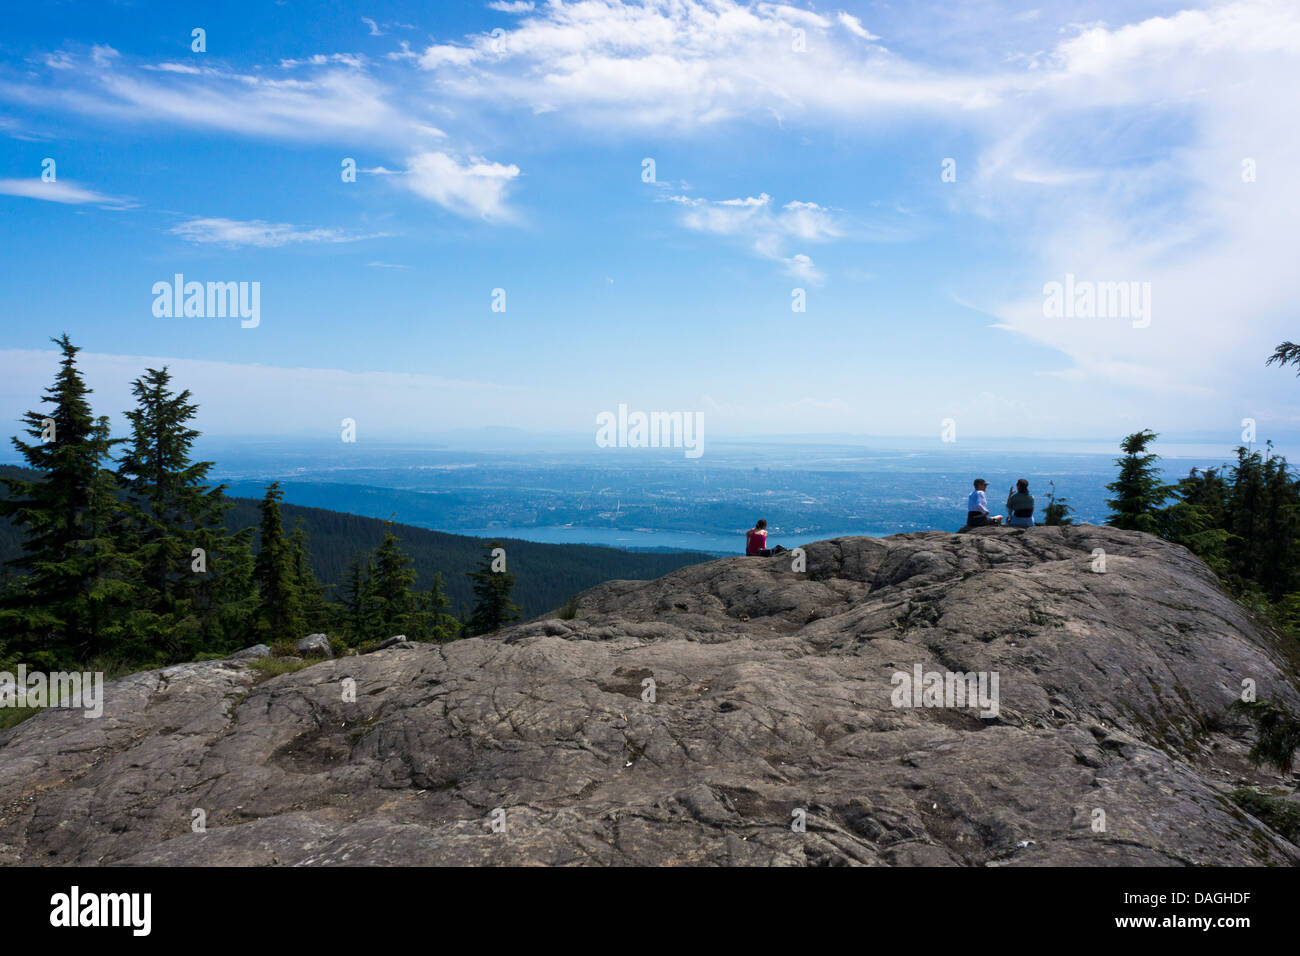 View over BC lower mainland from Dog Mountain in Mount Seymour Provincial Park, North Vancouver, British Columbia, Canada Stock Photo